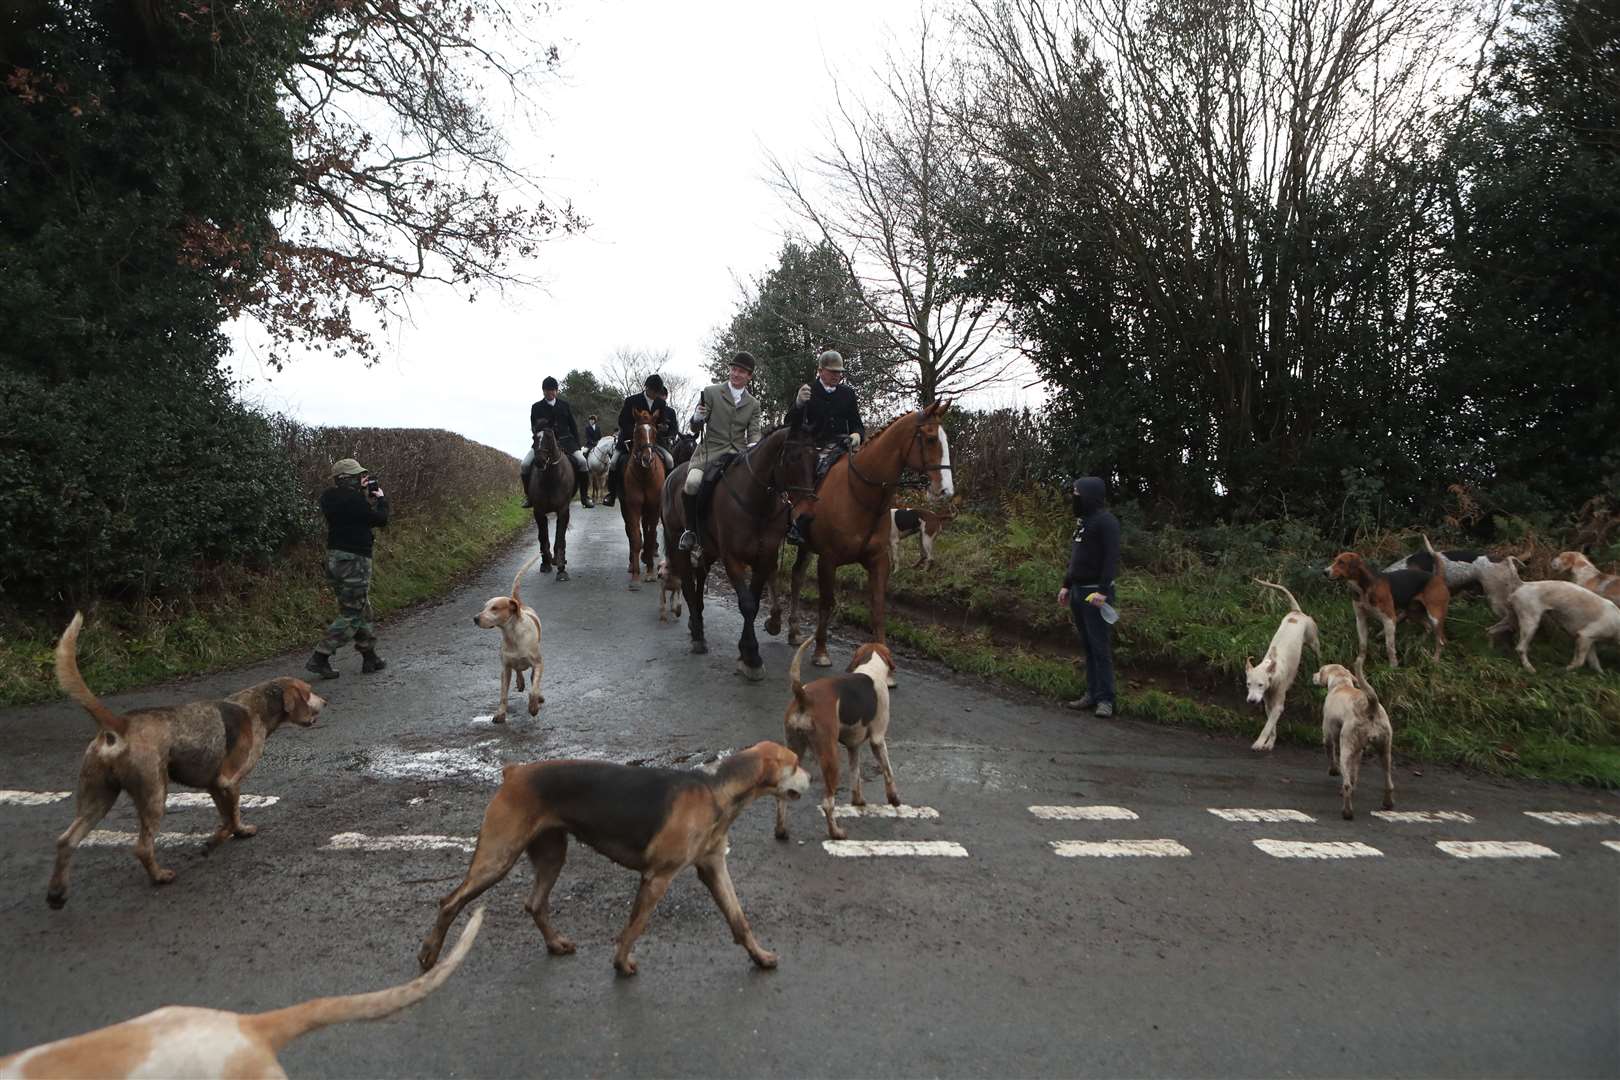 Hunt saboteurs photograph a Boxing Day Hunt near Husthwaite, North Yorkshire (Danny Lawson/PA)